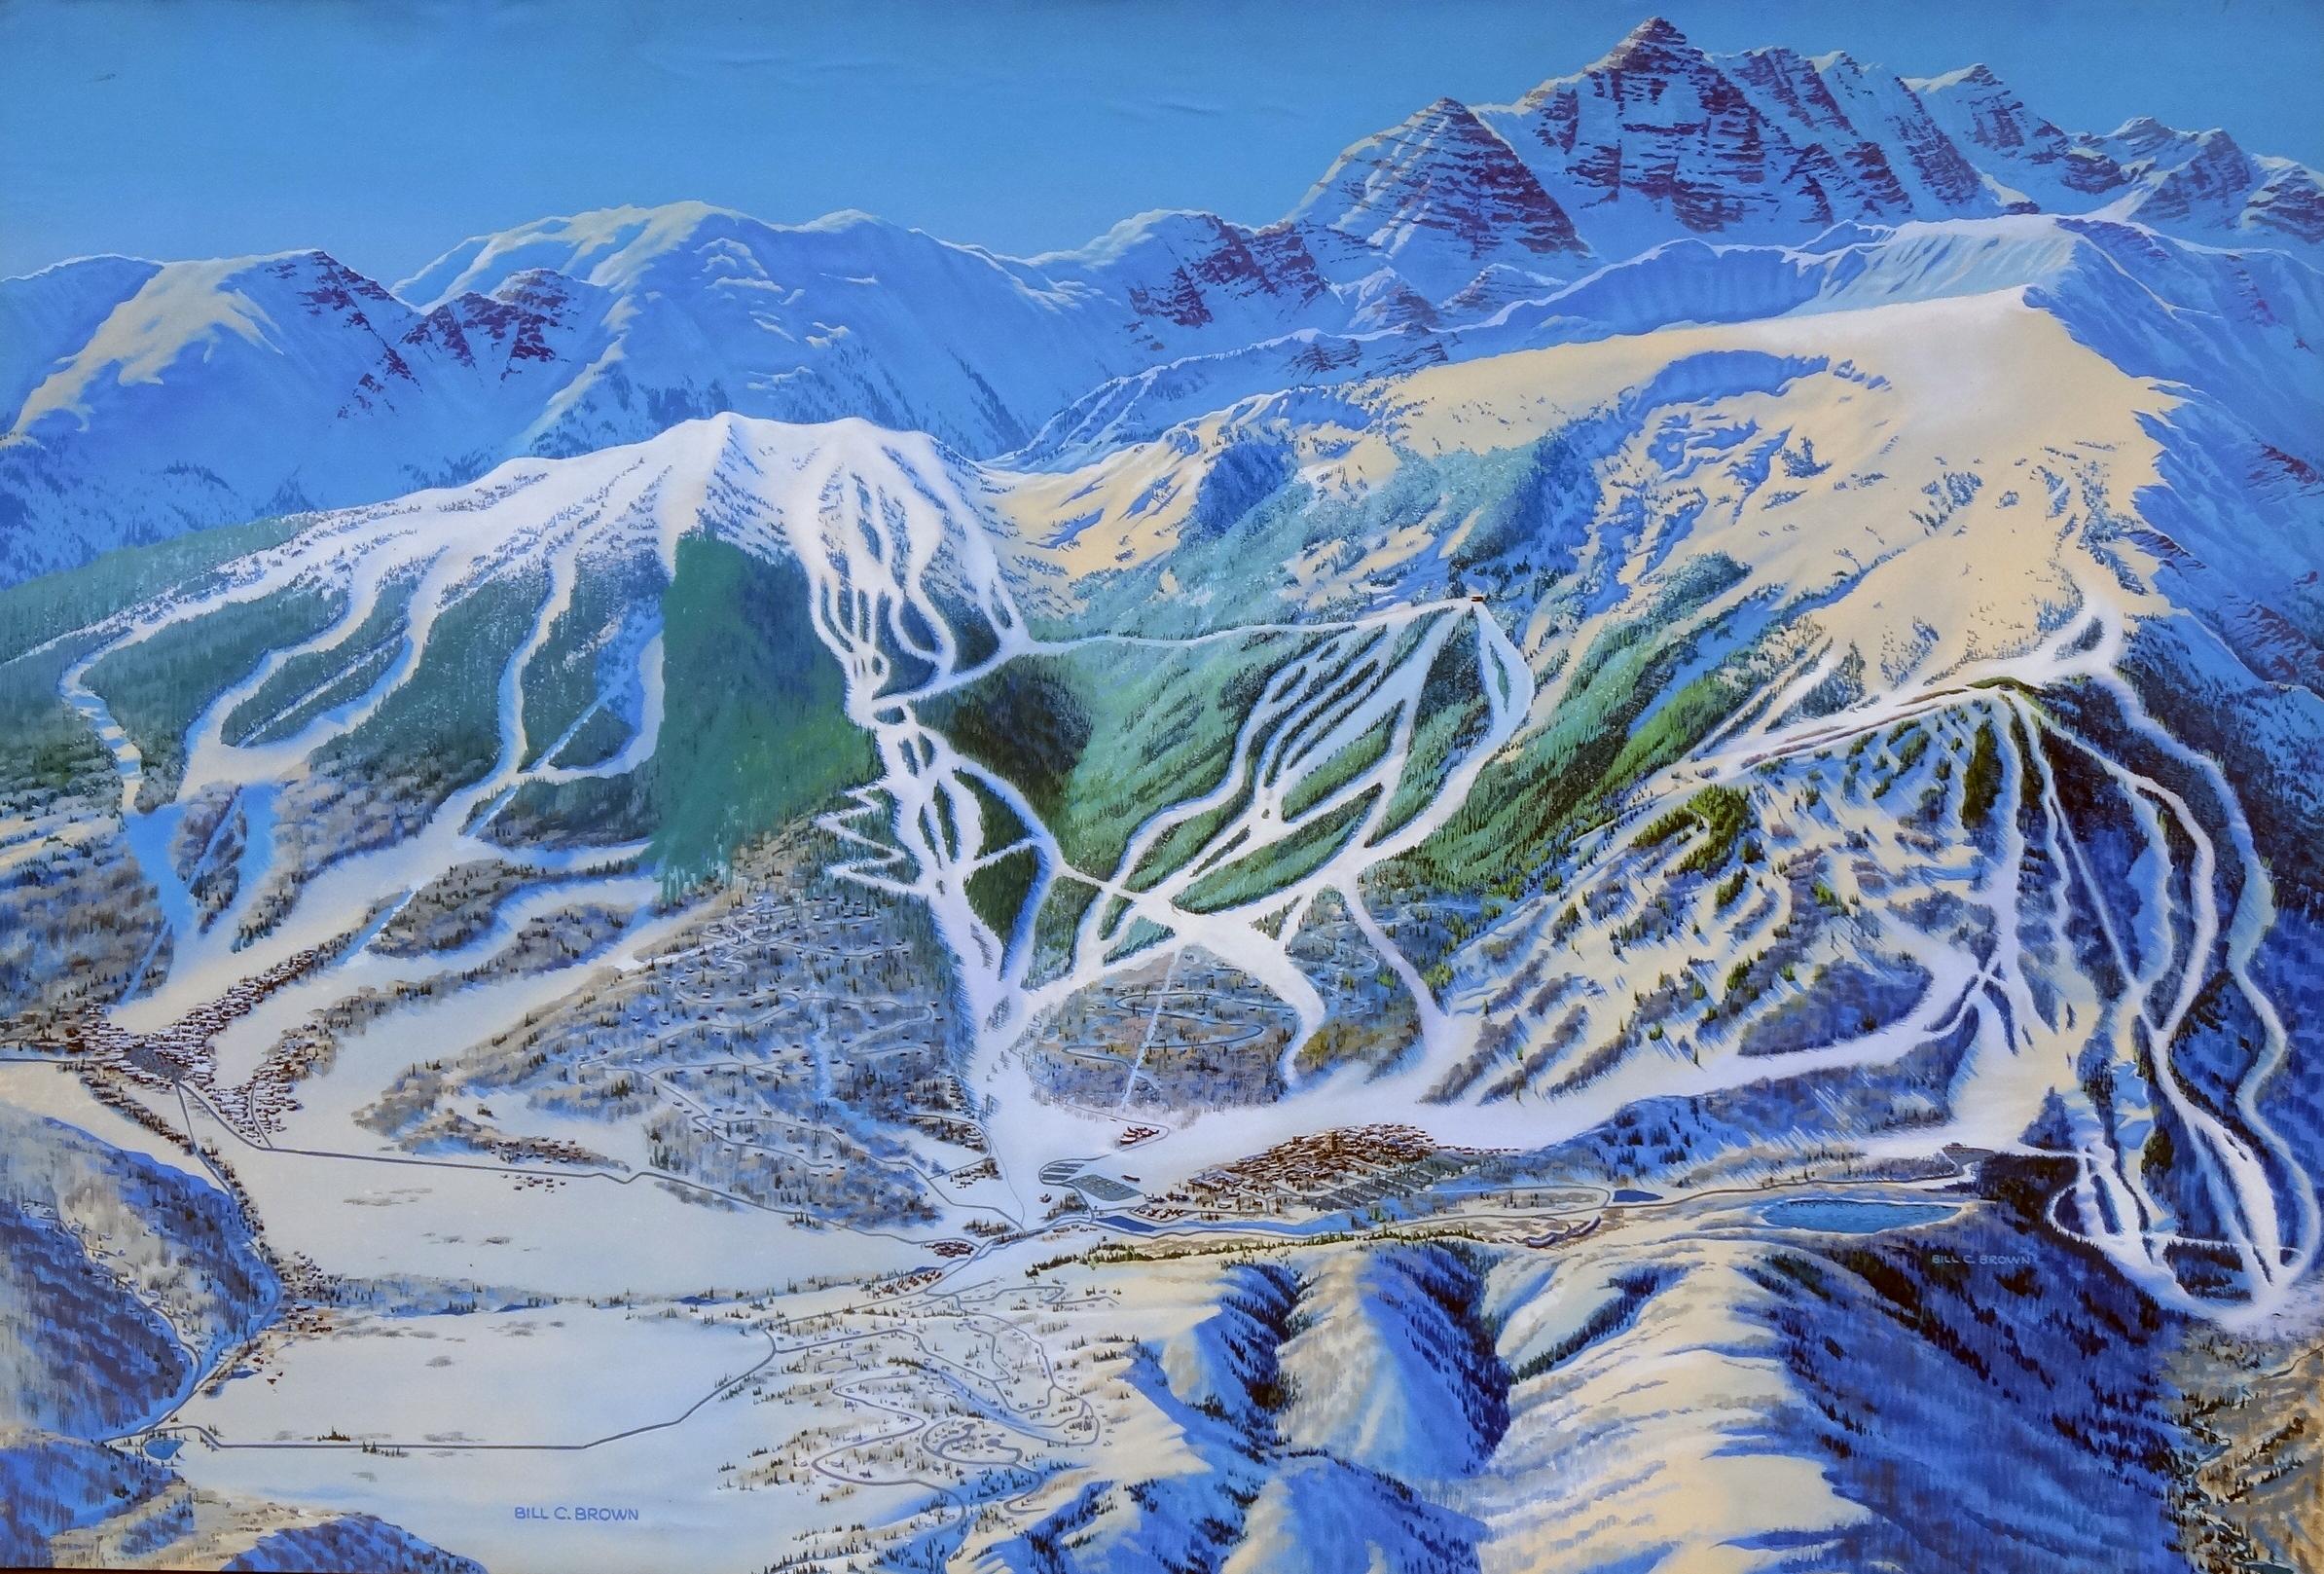 Bill C. Brown Landscape Painting - Trail Map Painting of Aspen Snowmass